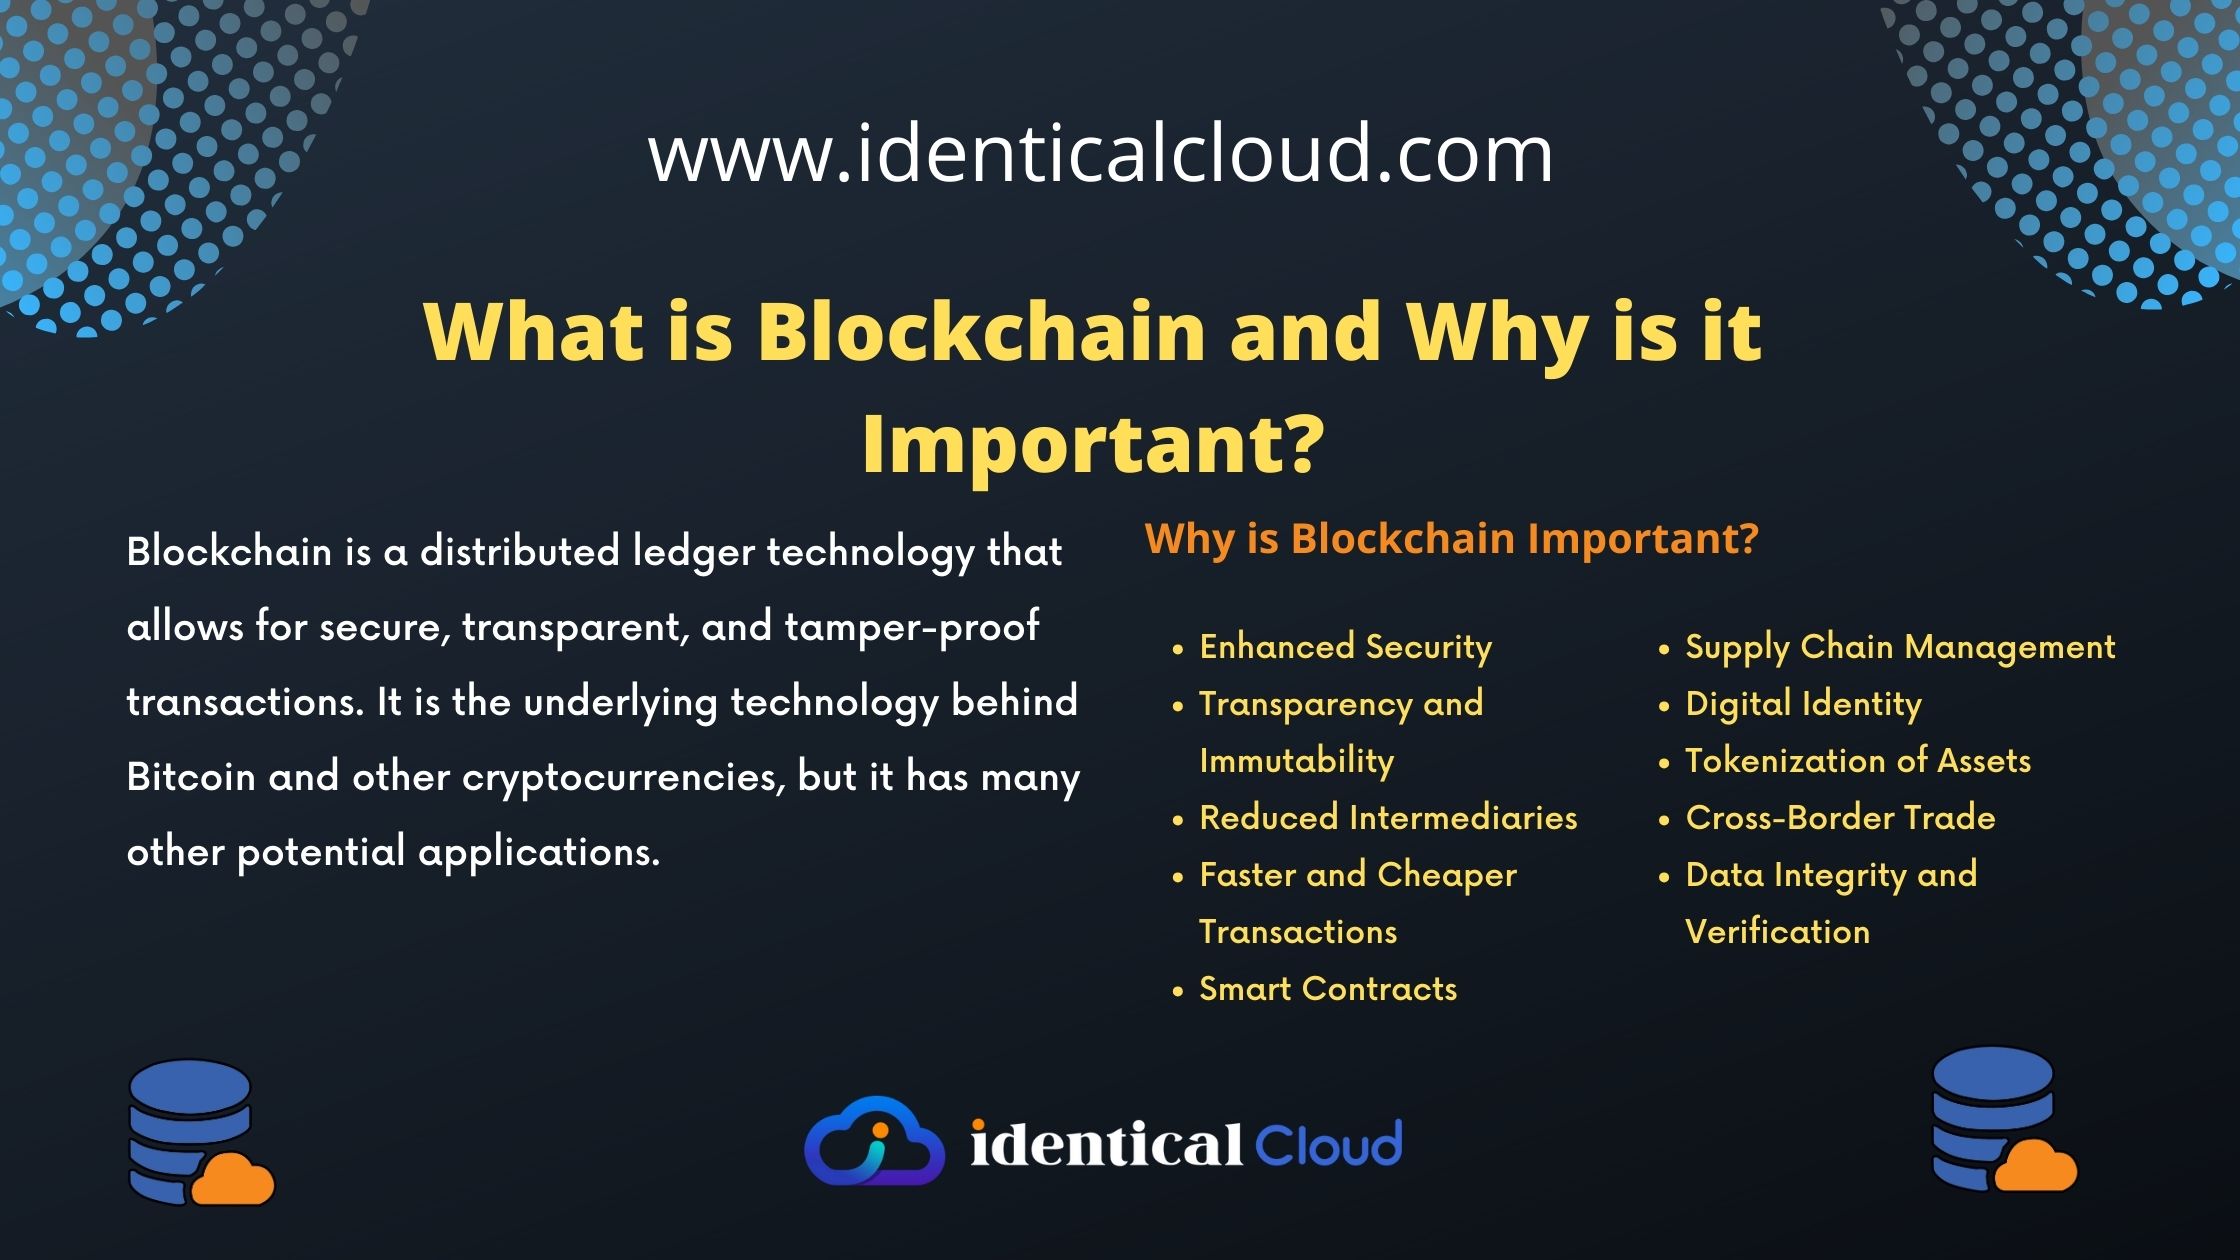 What is Blockchain and Why is it Important - identicalcloud.com